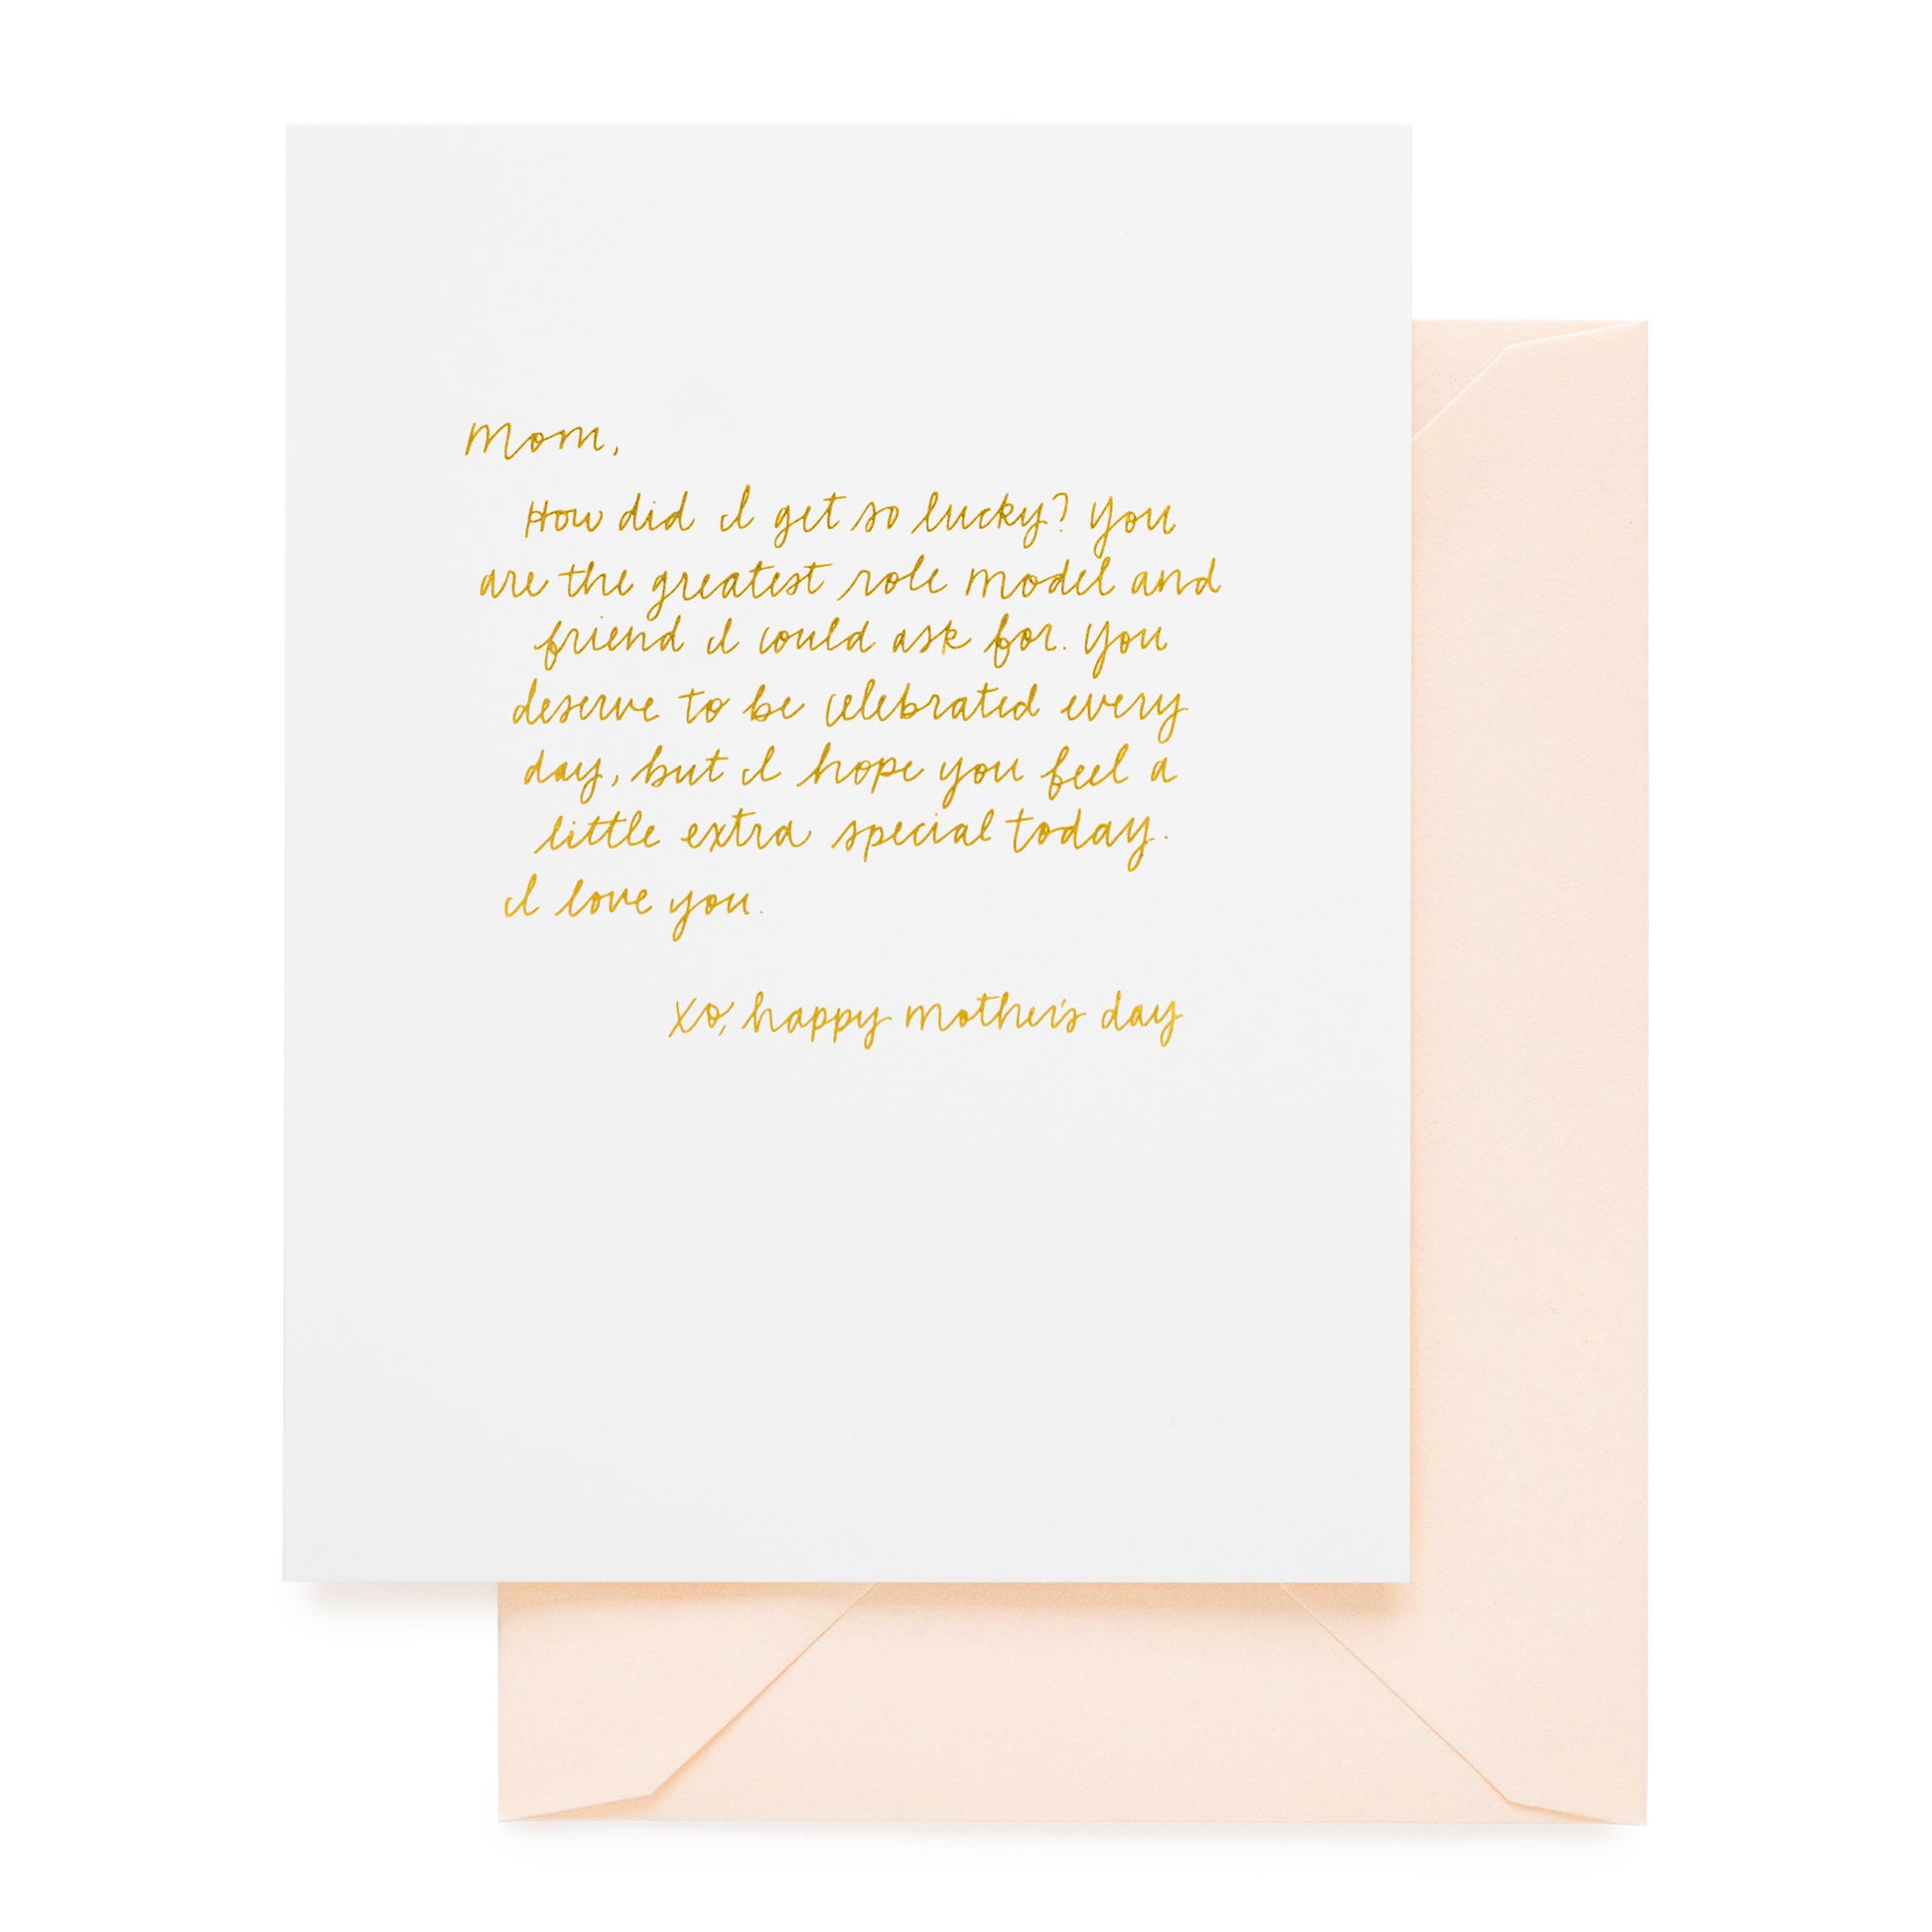 white card with gold text, pale pink envelope